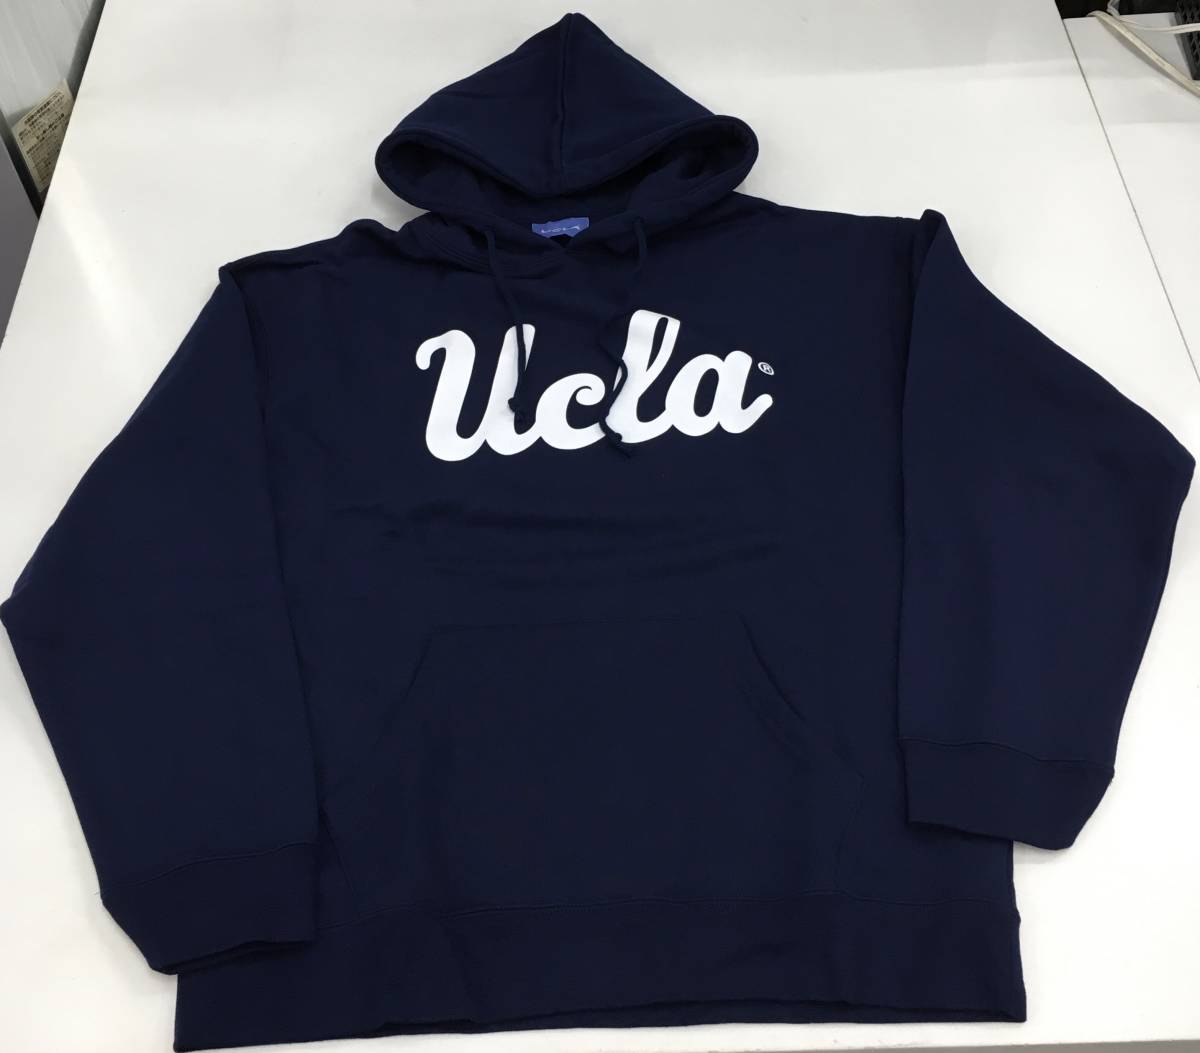  new goods unused goods URBAN RESEARCH Urban Research UCLA You si- L e- college Logo Parker reverse side nappy M size navy blue × white character ②